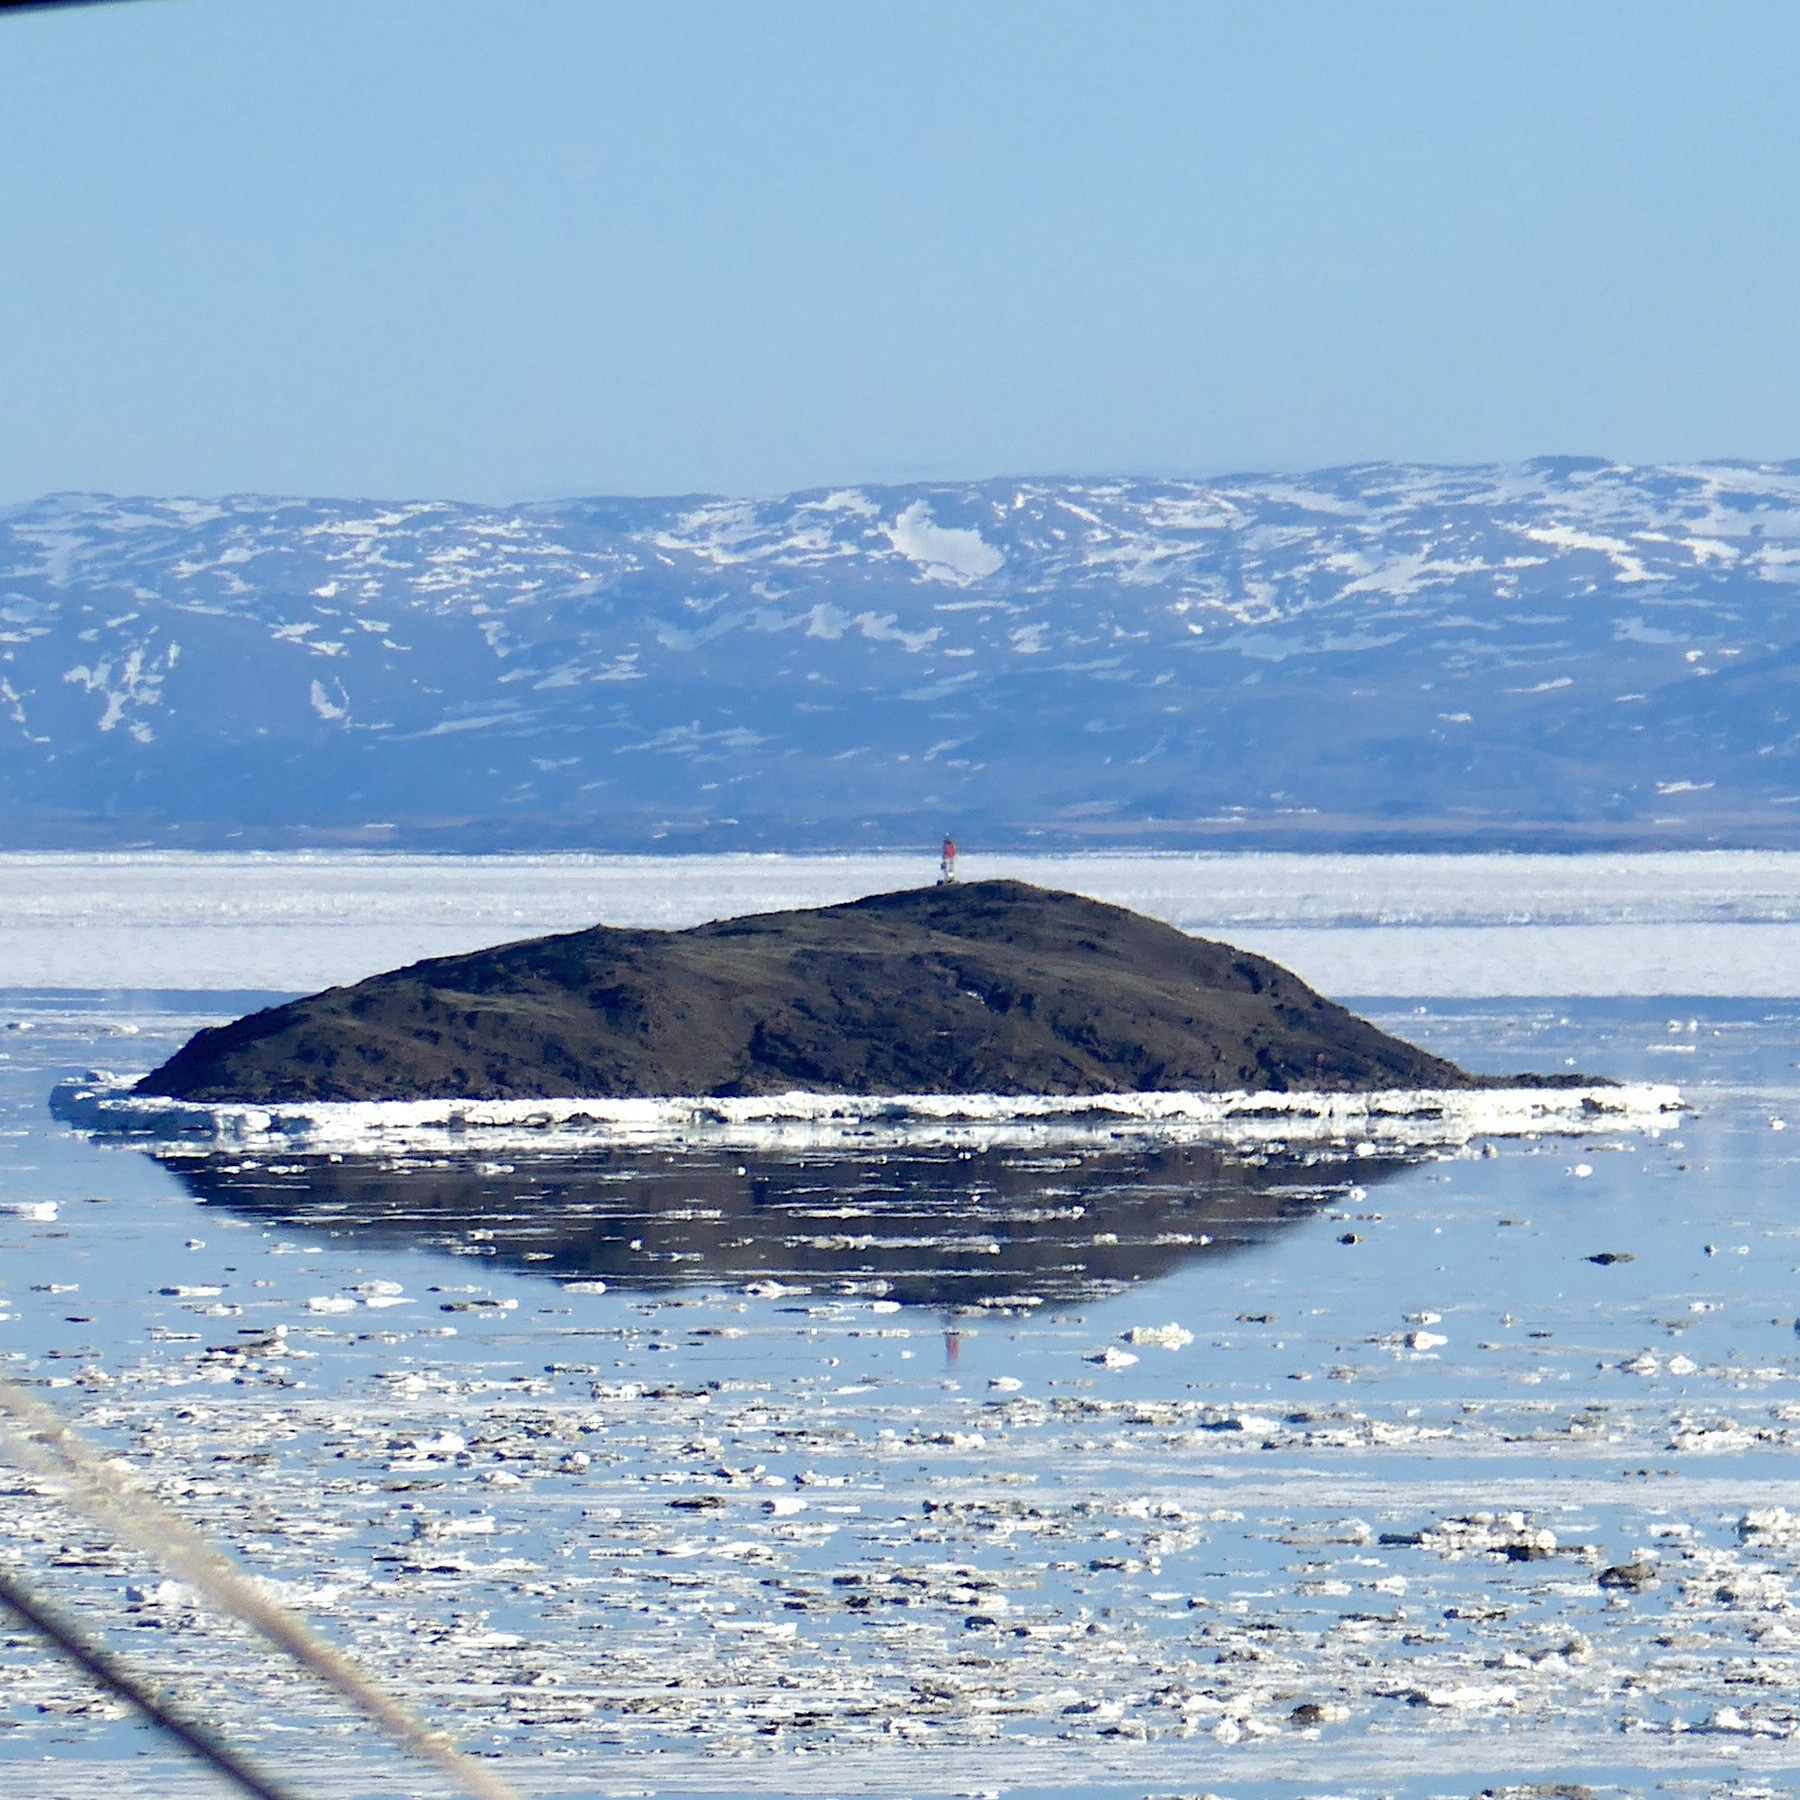 Island in the sea ice, surrounded by reflecting water on the surface; June 18, 2019